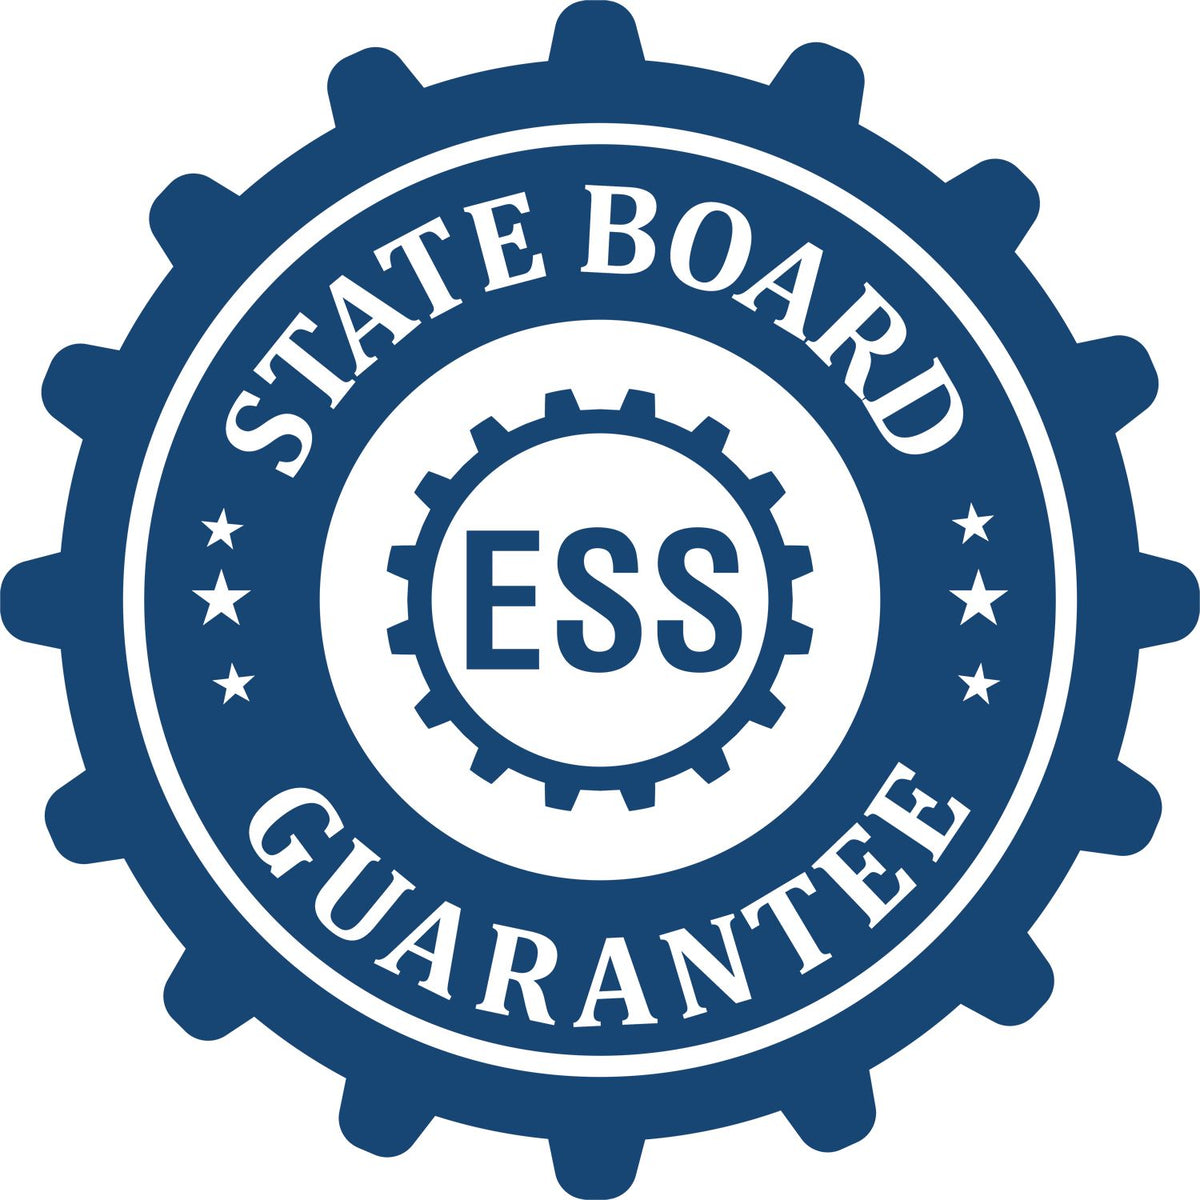 An emblem in a gear shape illustrating a state board guarantee for the Premium MaxLight Pre-Inked New Jersey Engineering Stamp product.